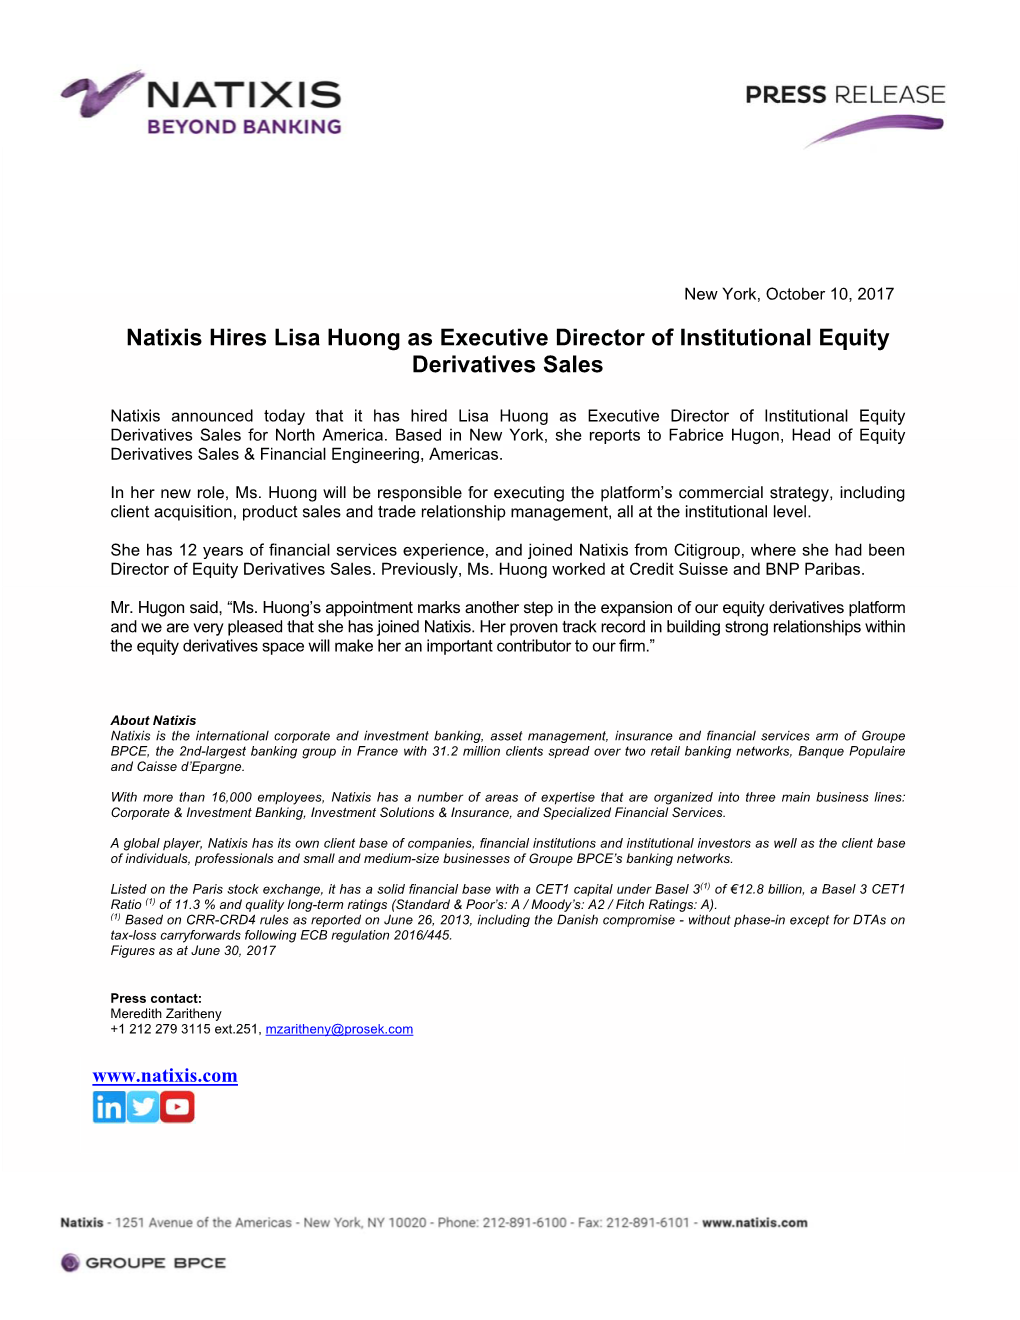 Natixis Hires Lisa Huong As Executive Director of Institutional Equity Derivatives Sales